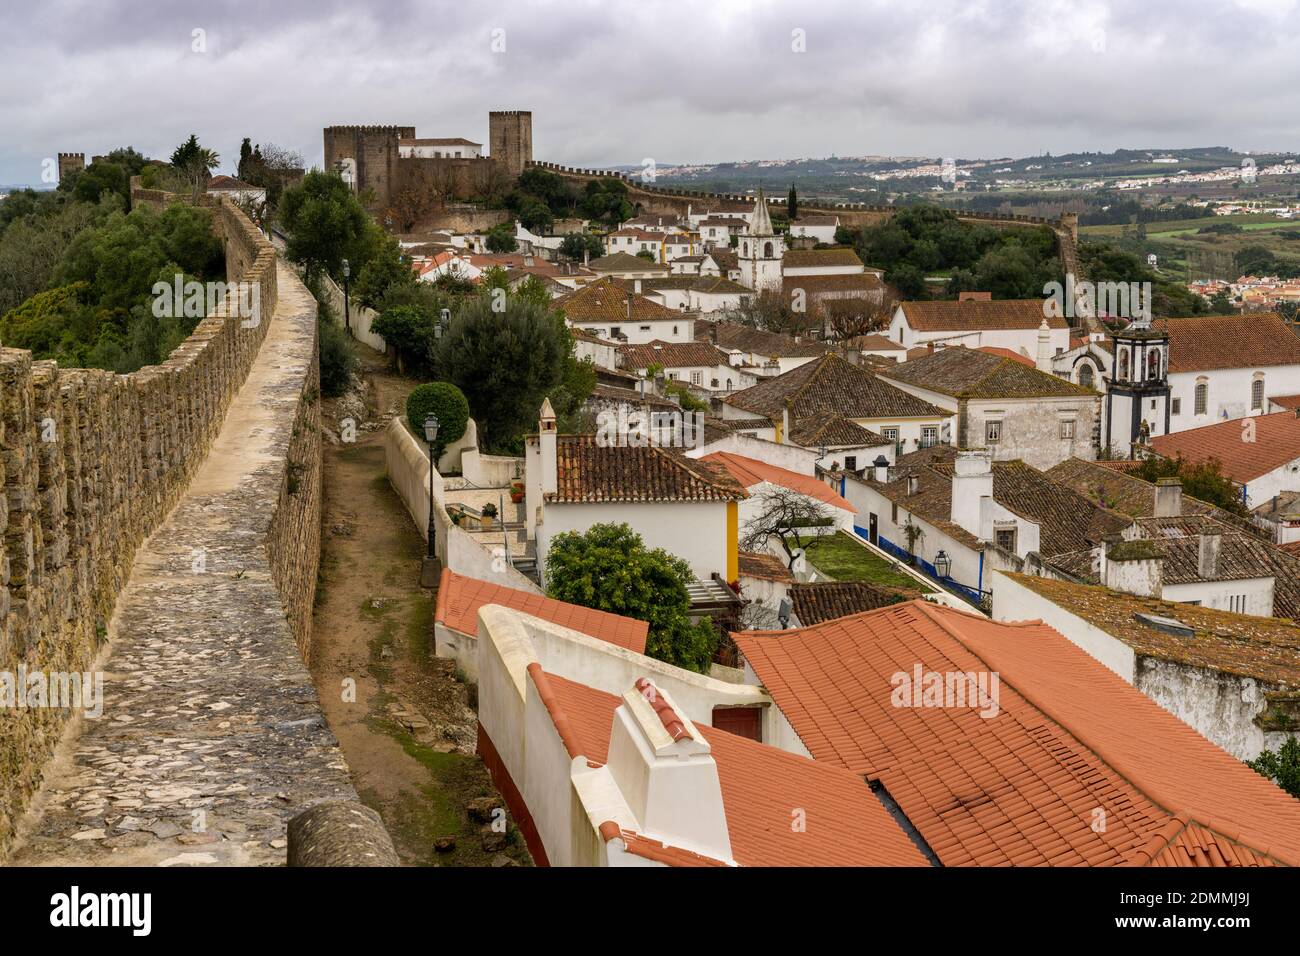 Obidos, Portugal - 13 December 2020: view of the picturesque village of Obidos in central Portugal Stock Photo